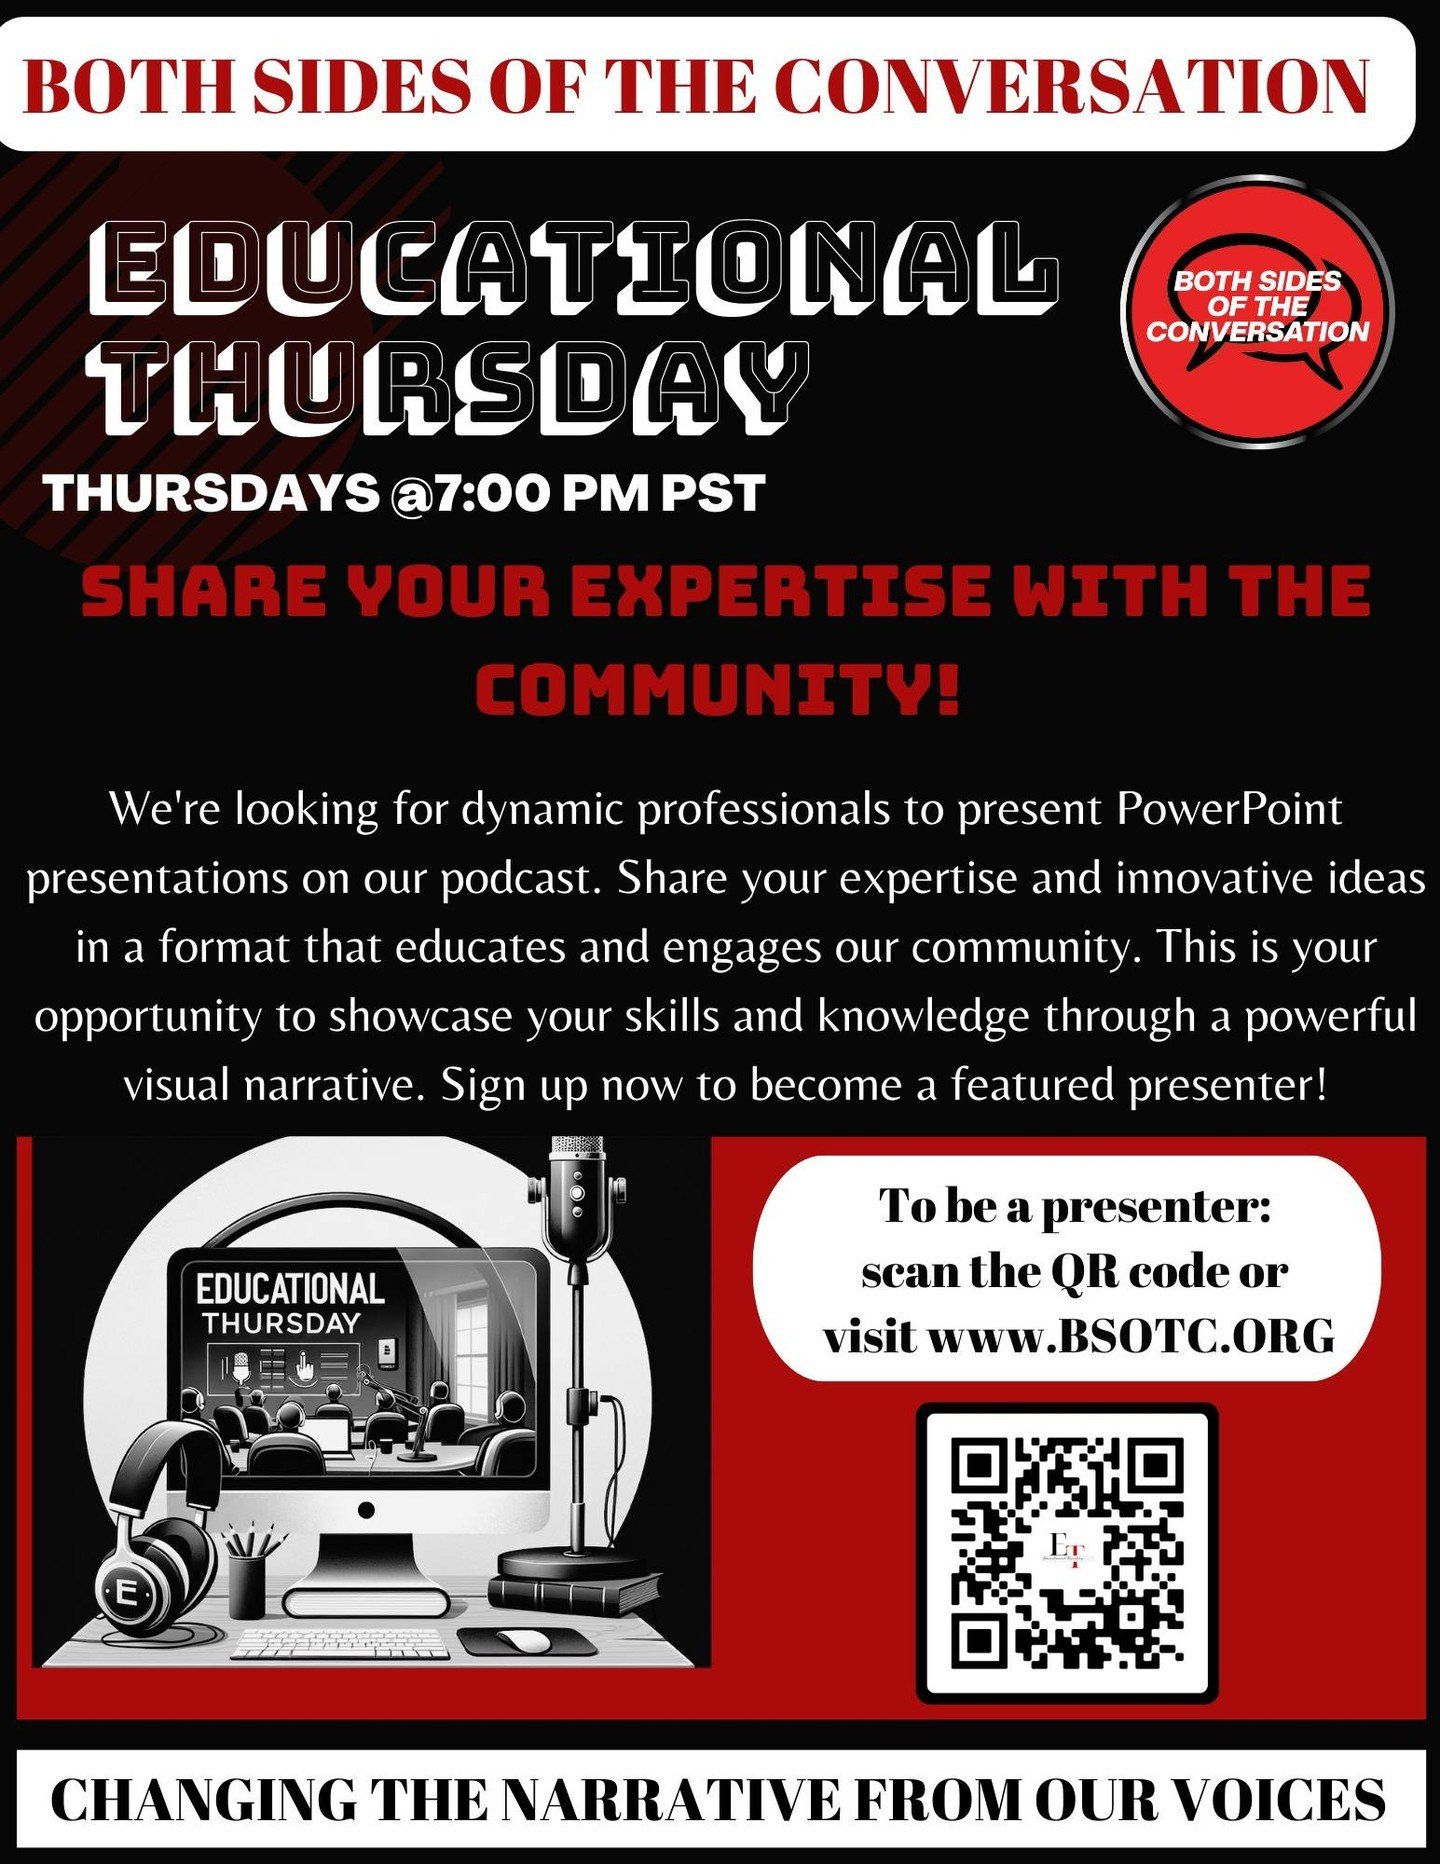 🌟 Share Your Expertise with Our Community! 🌟

Are you a dynamic professional with knowledge to share? We're inviting you to present on our podcast through engaging PowerPoint presentations!

This is your chance to share your expertise and innovativ